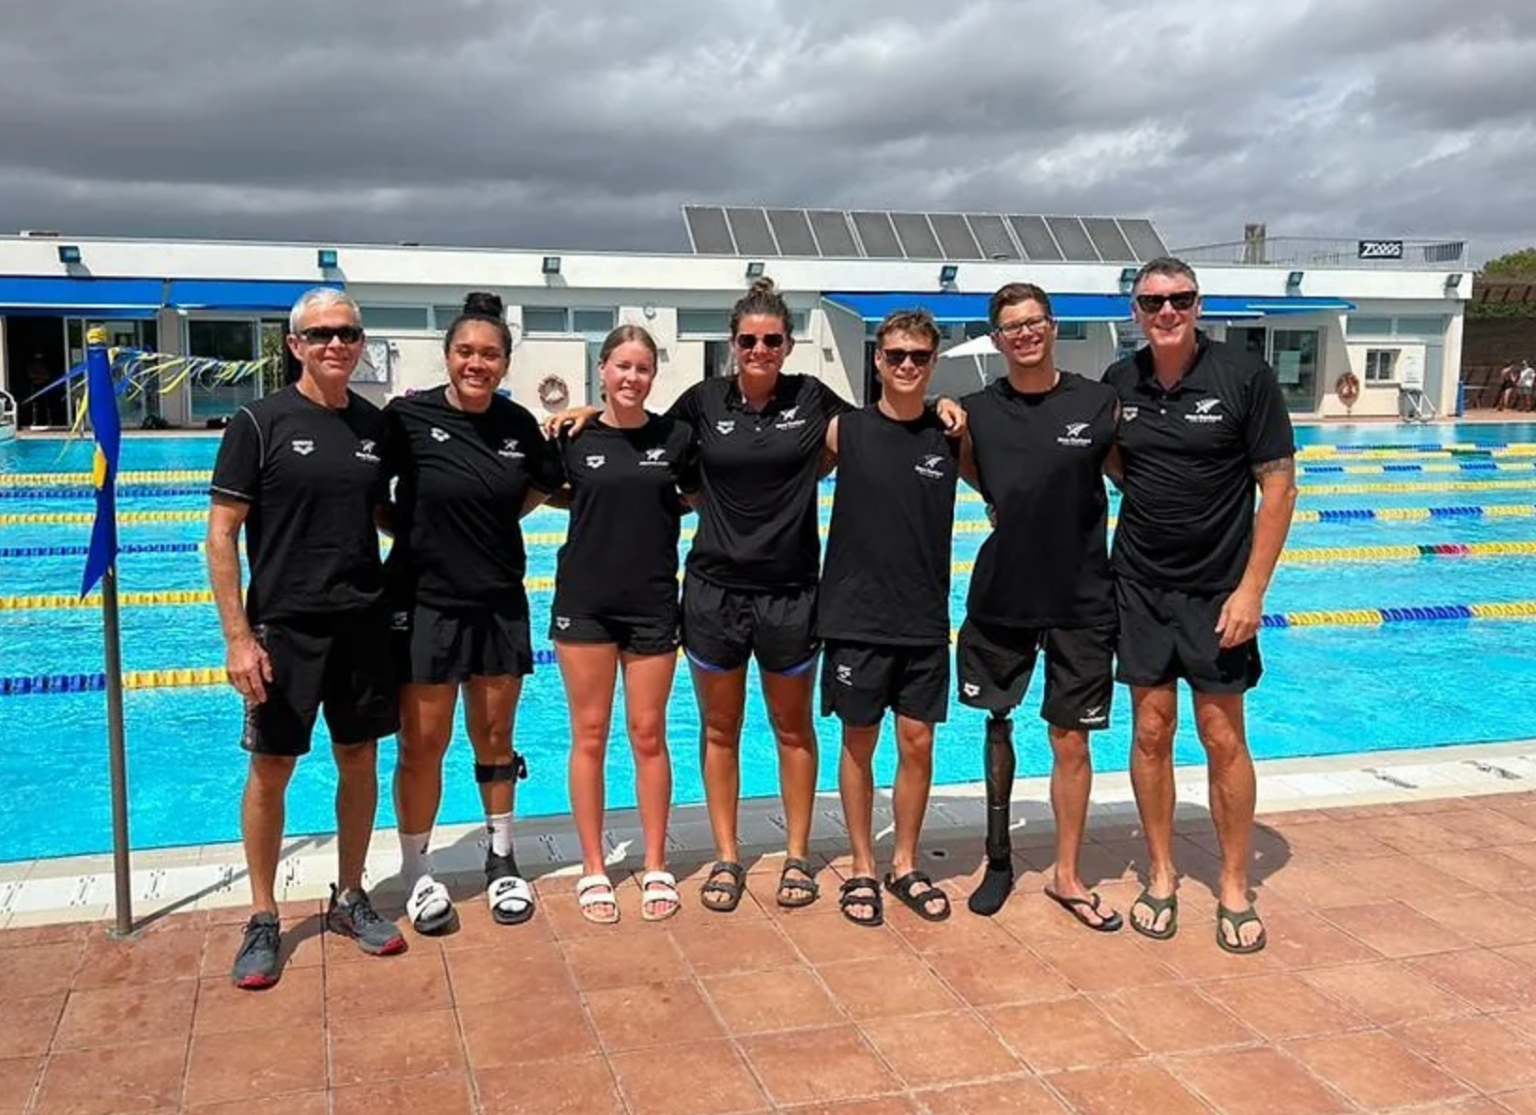 Most of the swim team and support staff stand in a line in front of an outdoor pool in uniform